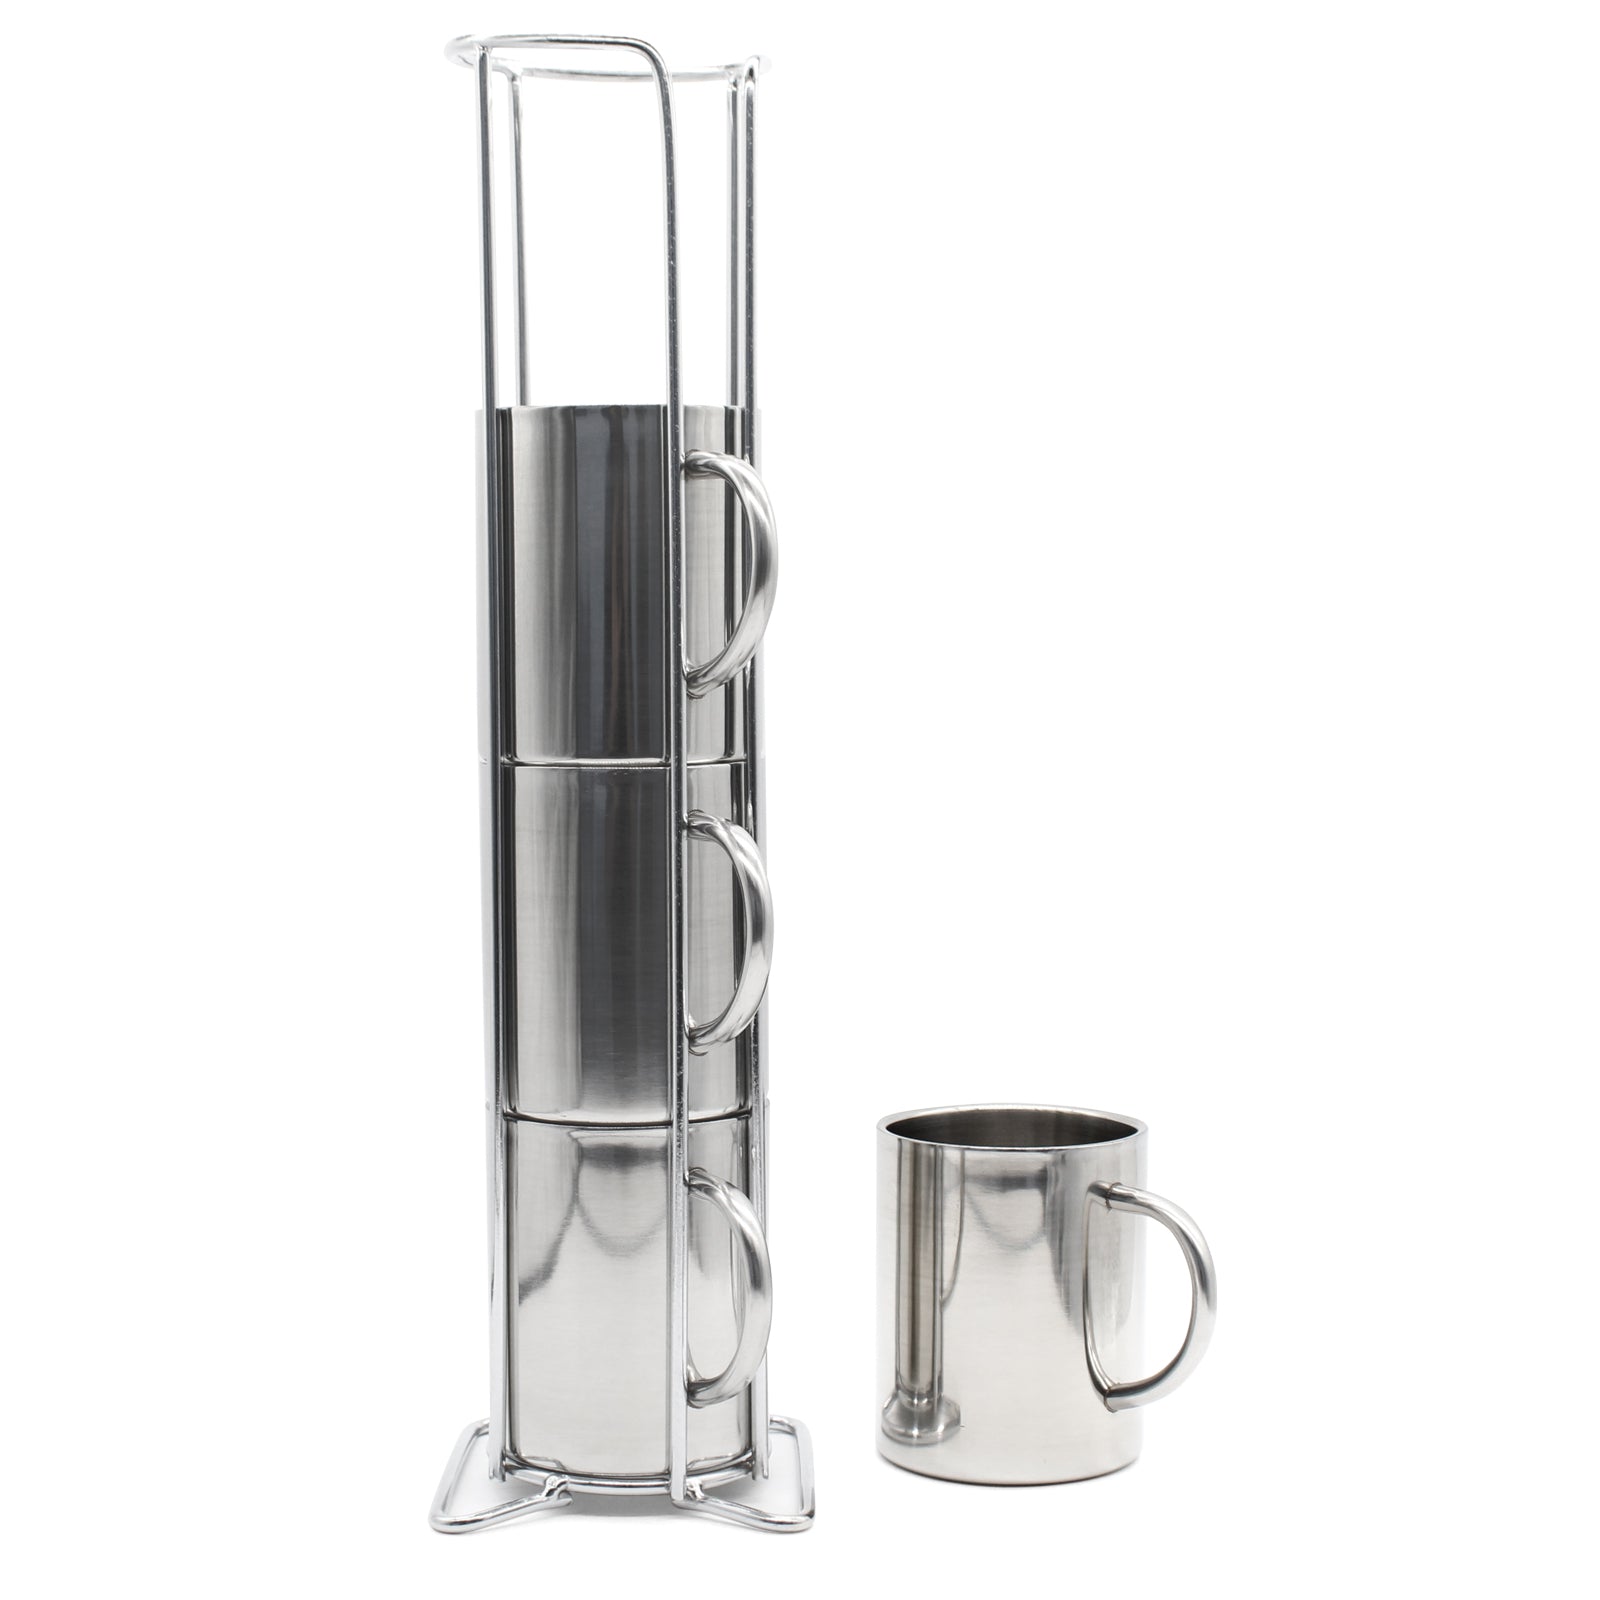 Stainless Steel Drinking Mug Set with Tower Holder